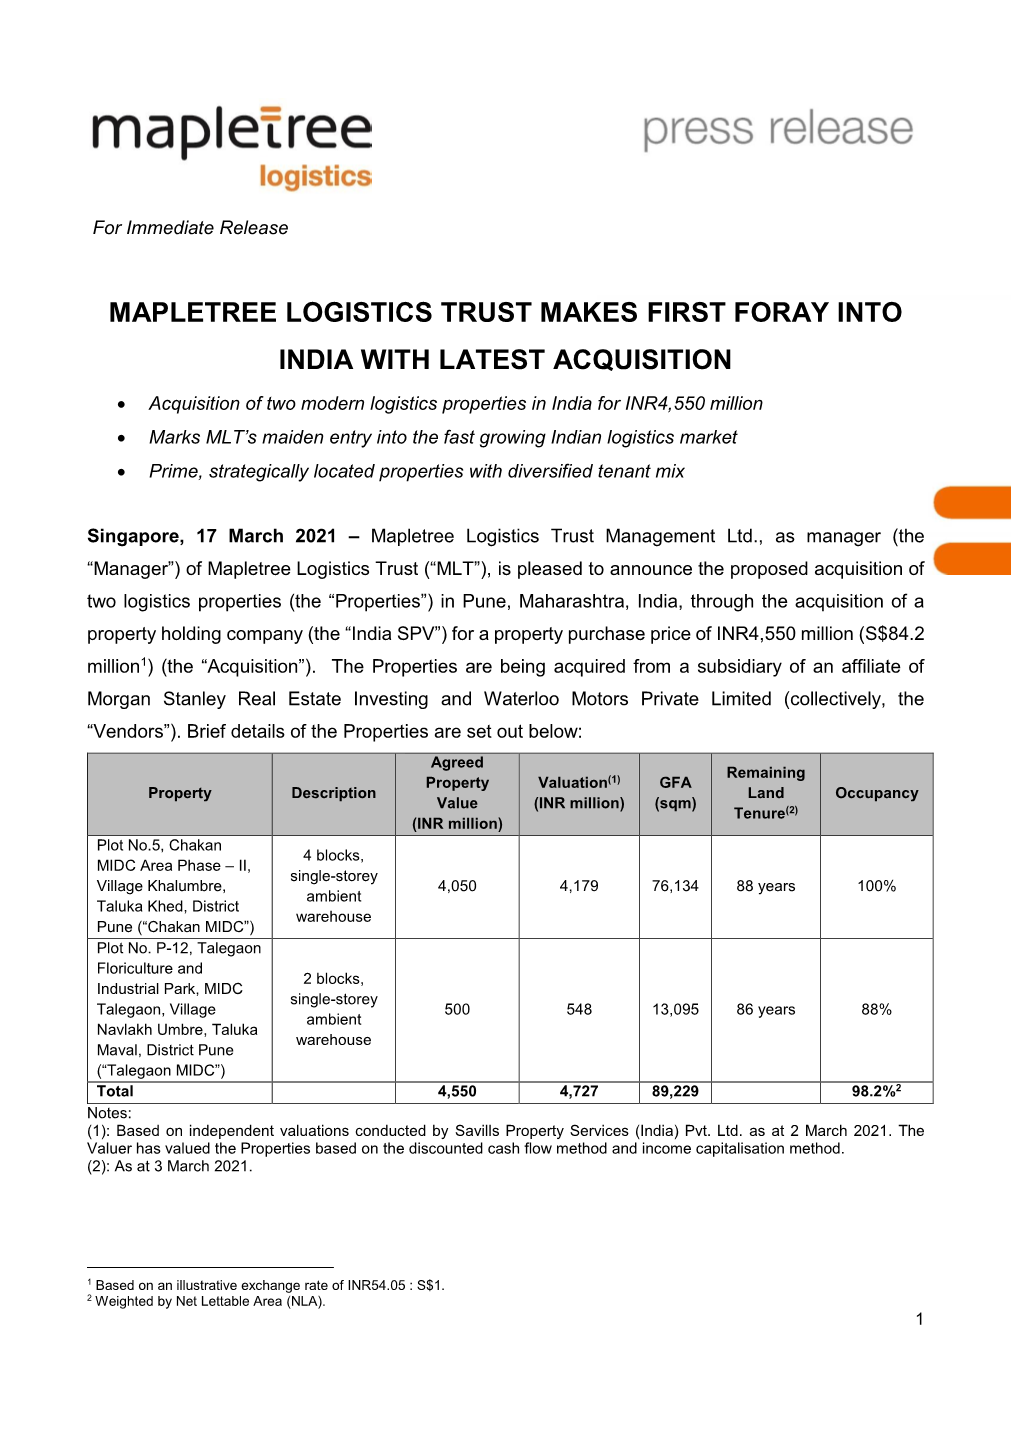 Mapletree Logistics Trust Makes First Foray Into India with Latest Acquisition